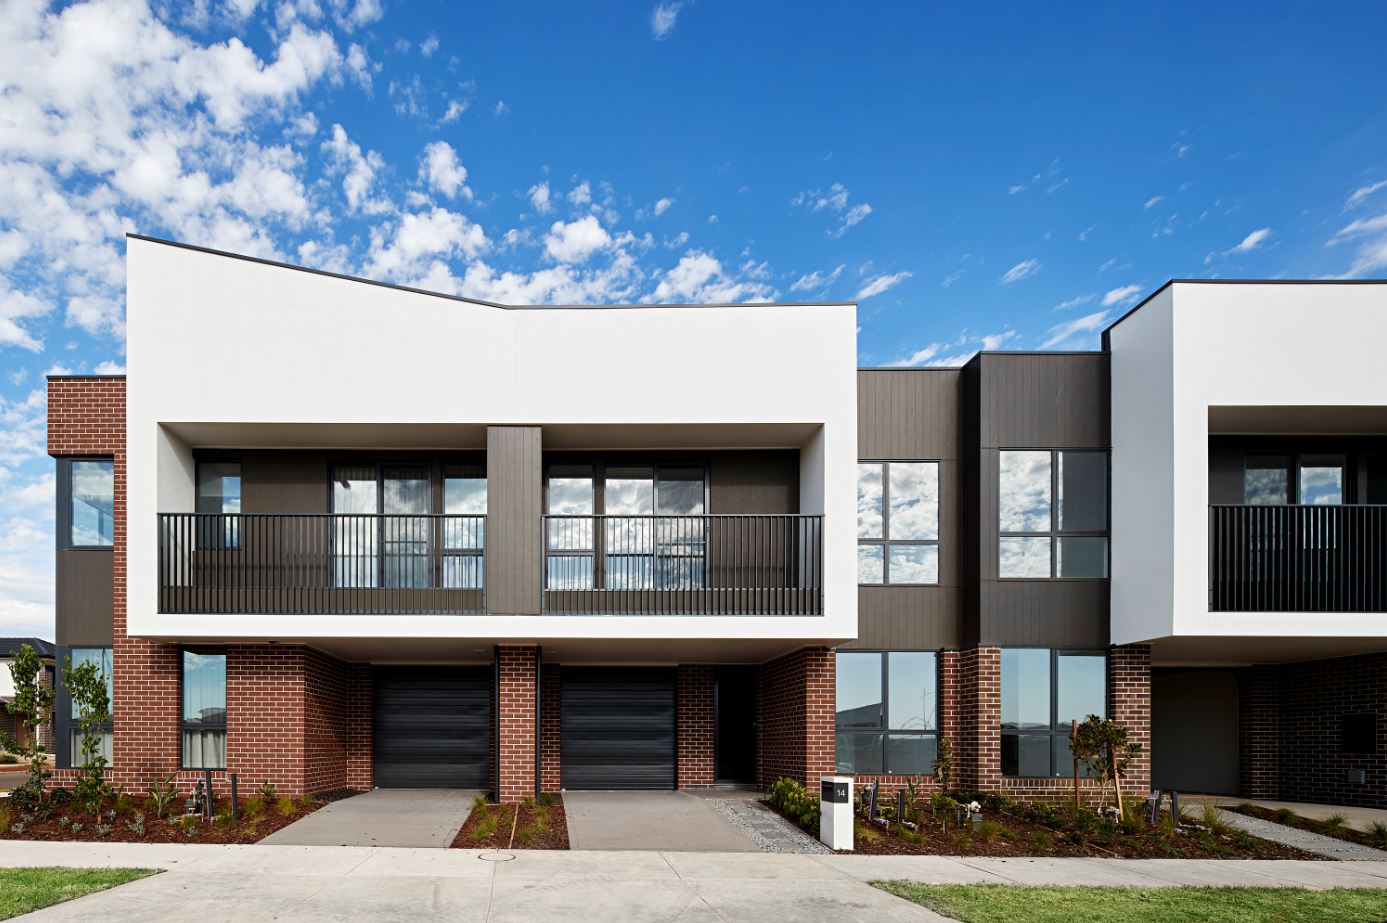 Top reasons to invest in a townhouse